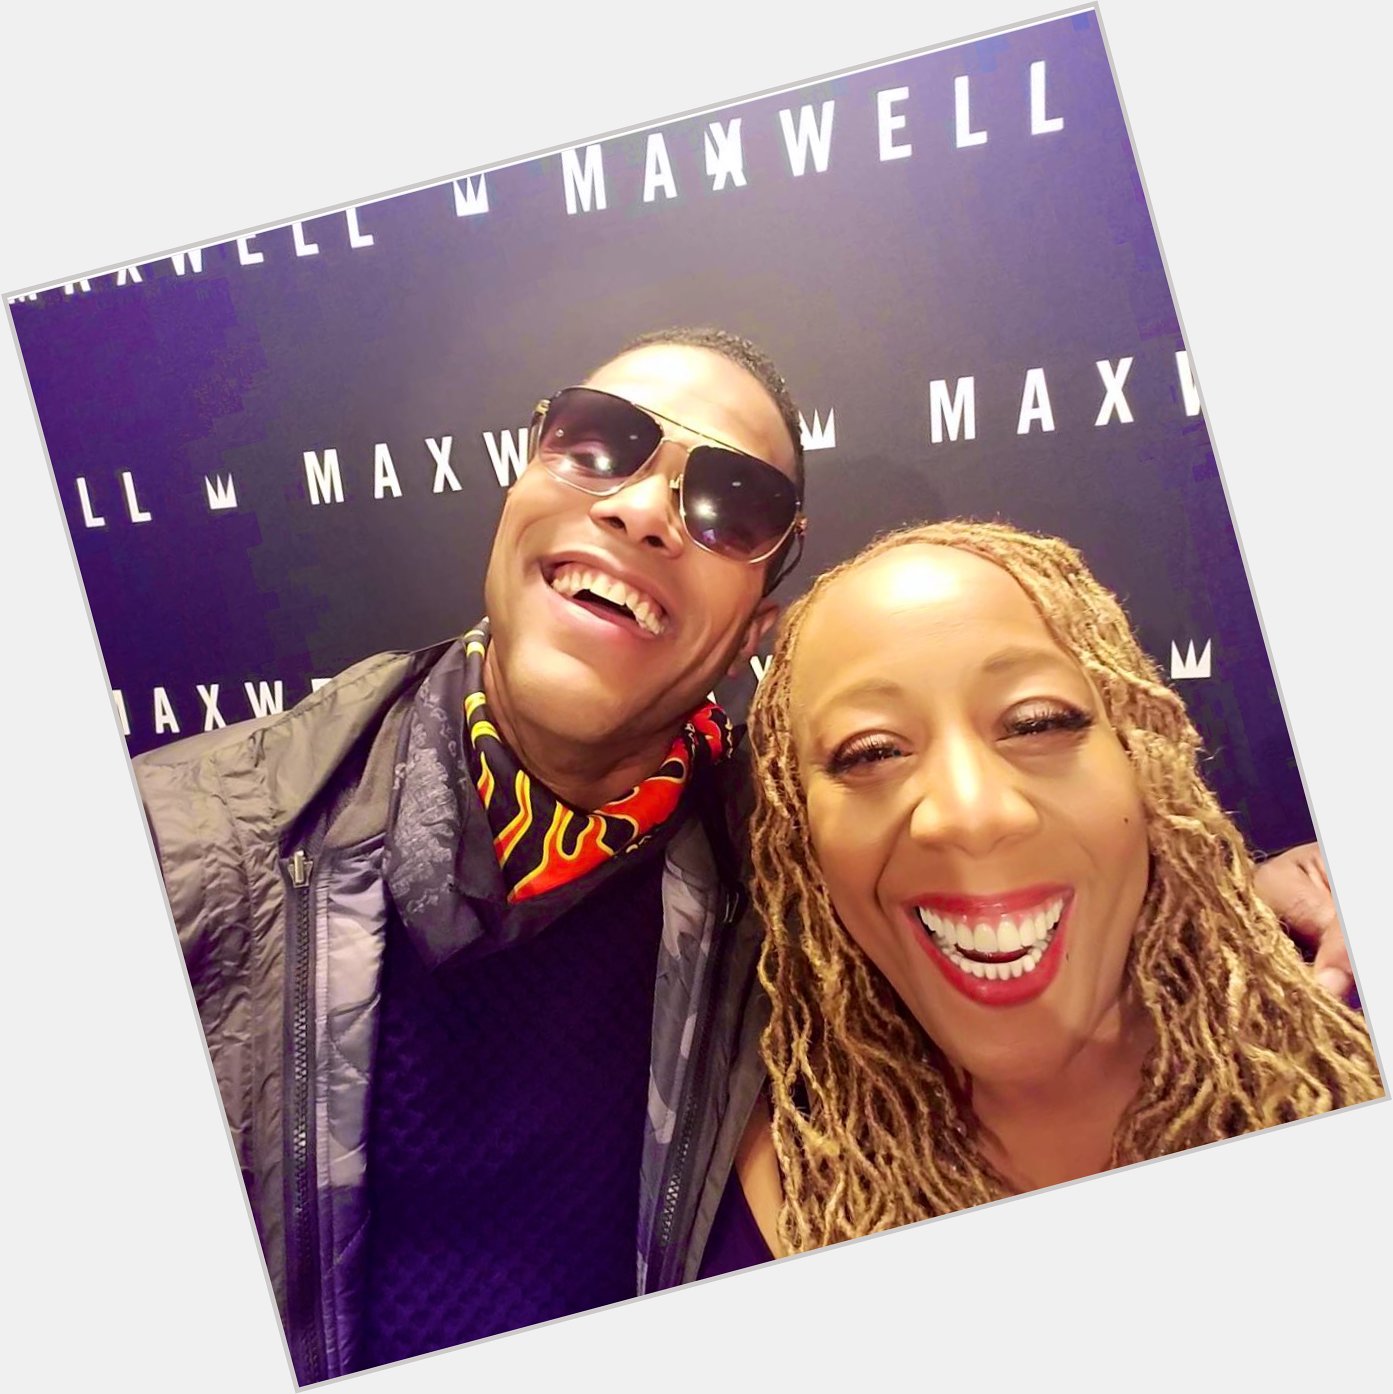 Happy Belated Birthday to Singer Maxwell. He celebrated over the weekend  